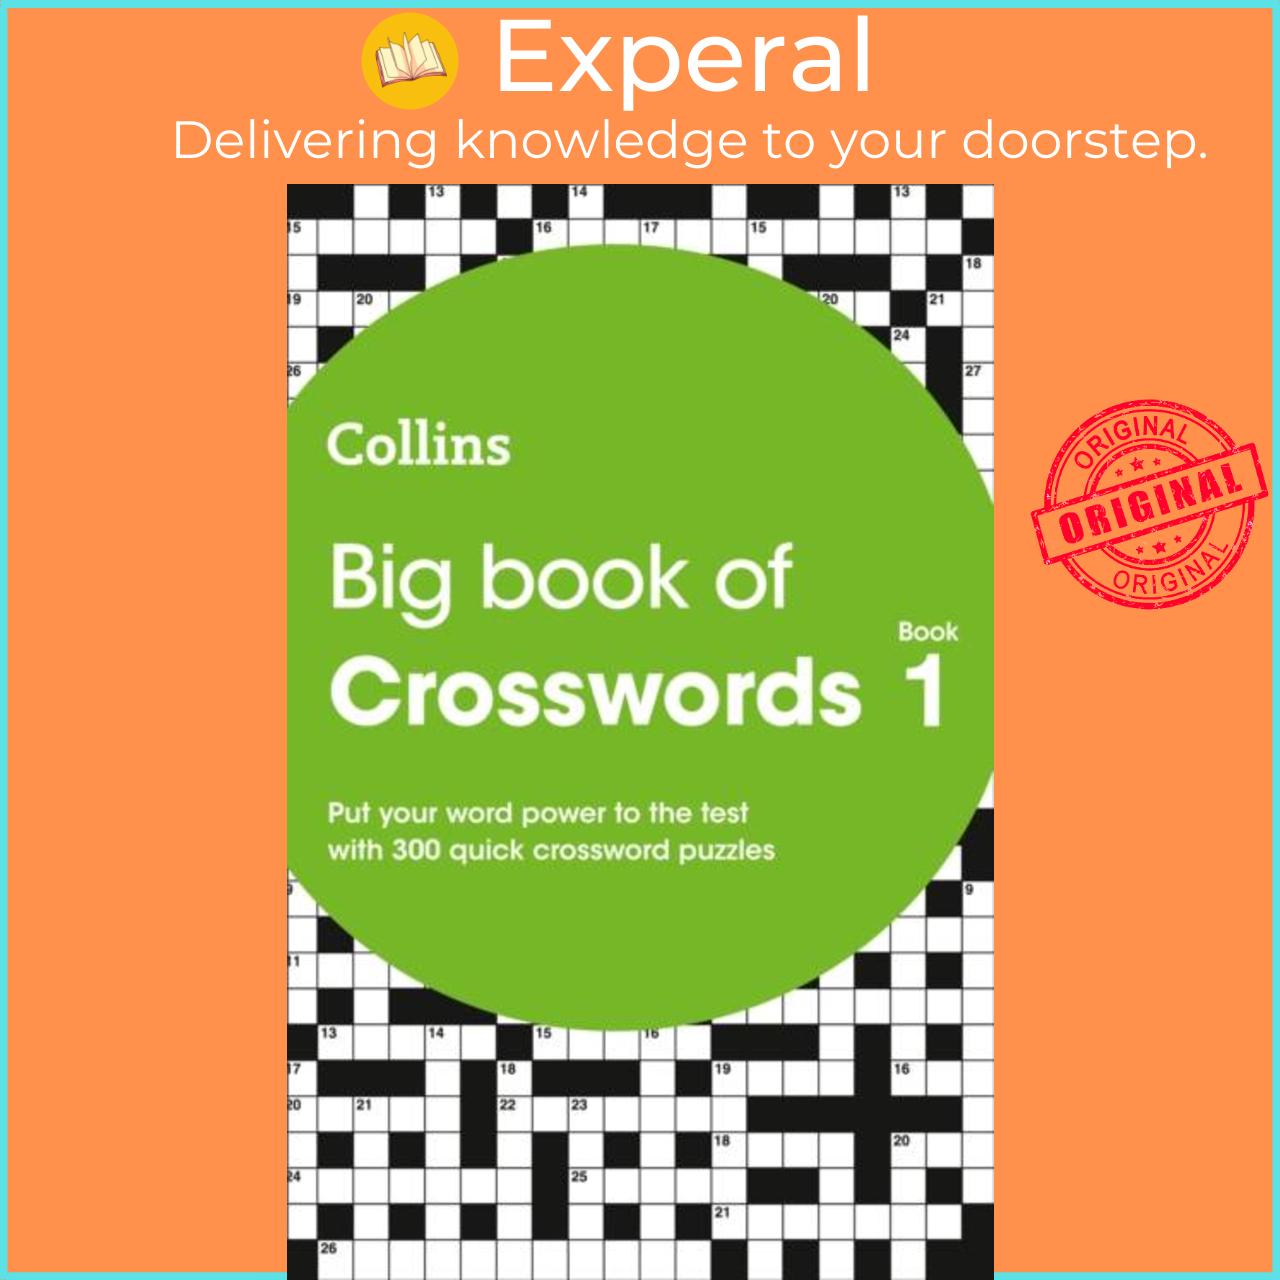 Sách - Big Book of Cross 1 - 300 Quick Cros Puzzles by Collins Puzzles (UK edition, paperback)